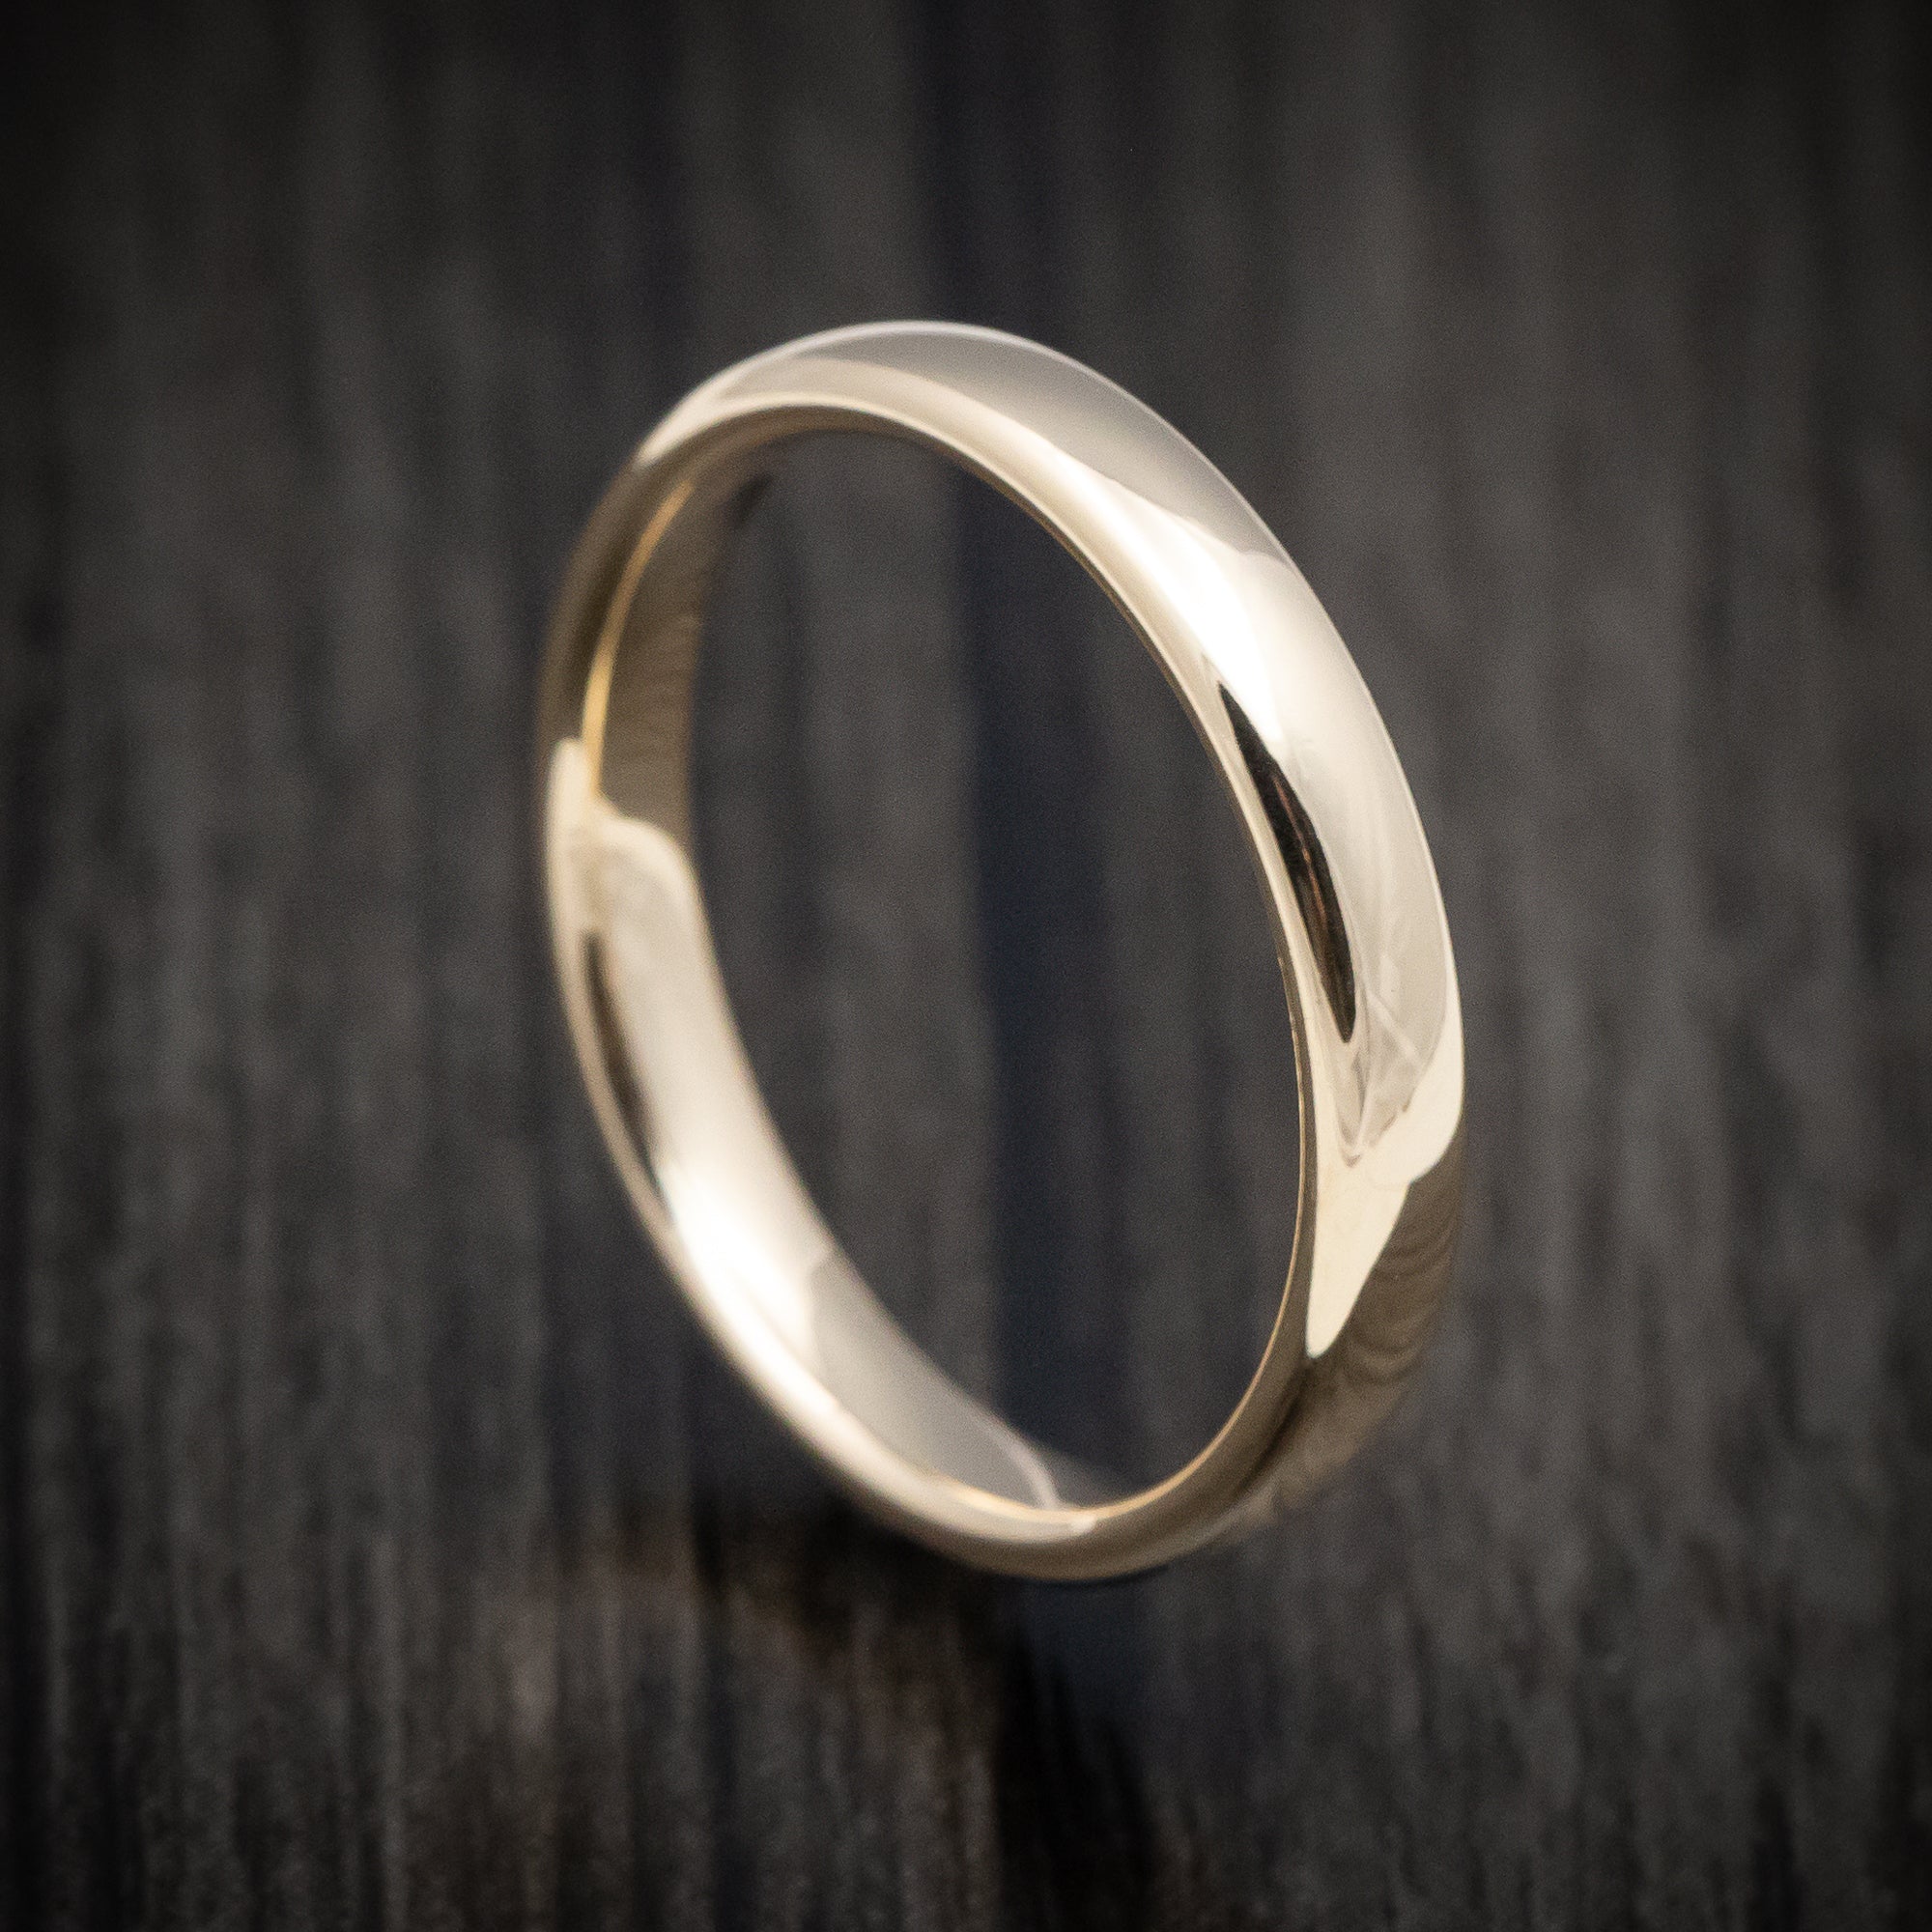 Solid Gold Men's Rings and Wedding Bands | Revolution Jewelry